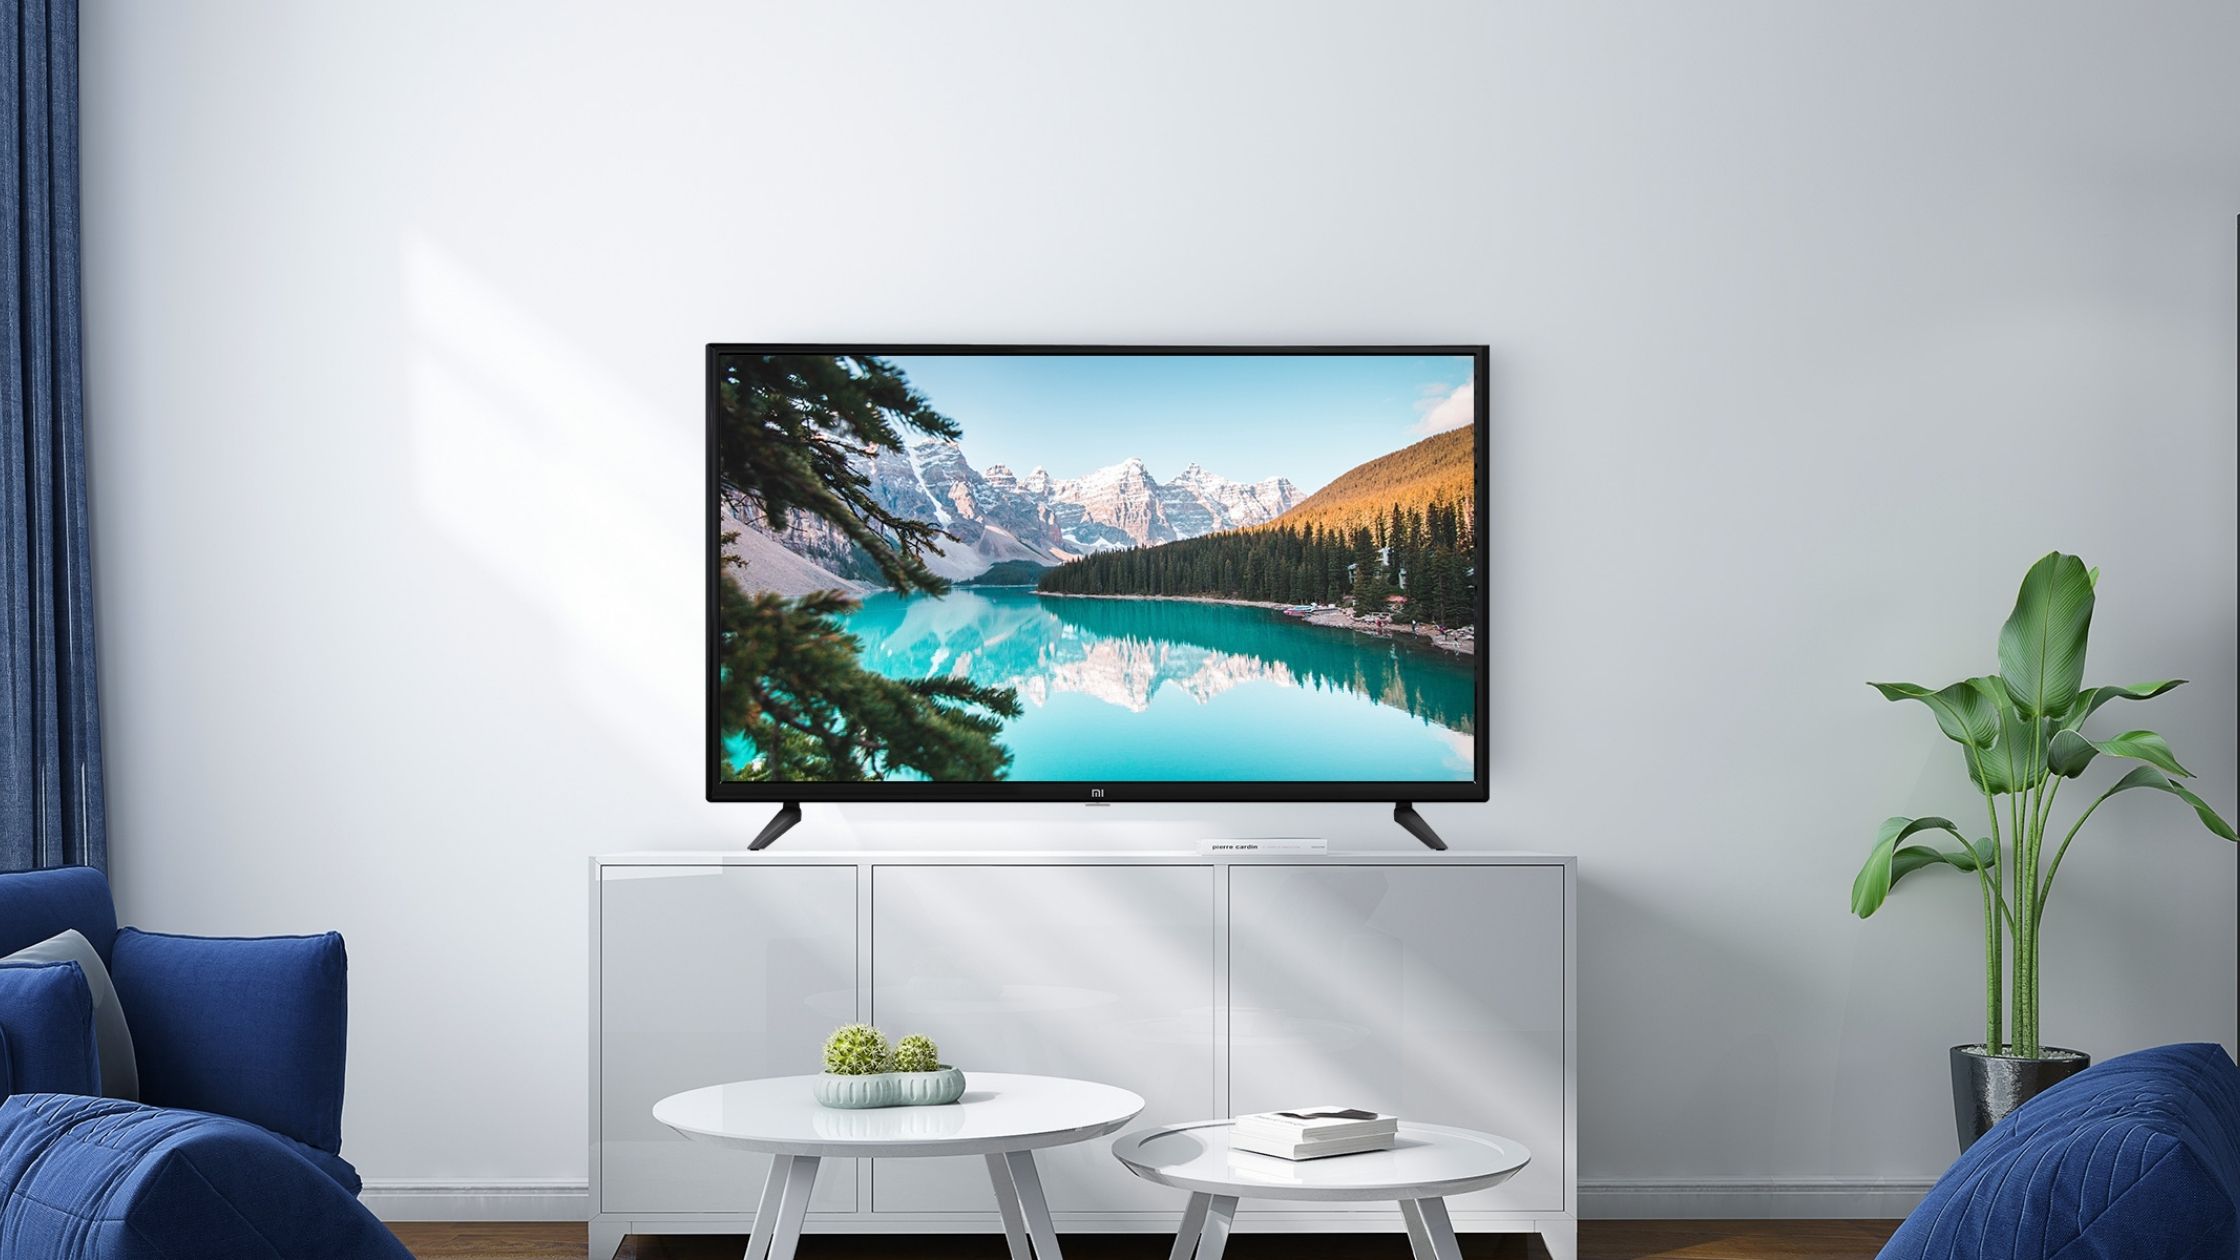 Image of a Smart TV